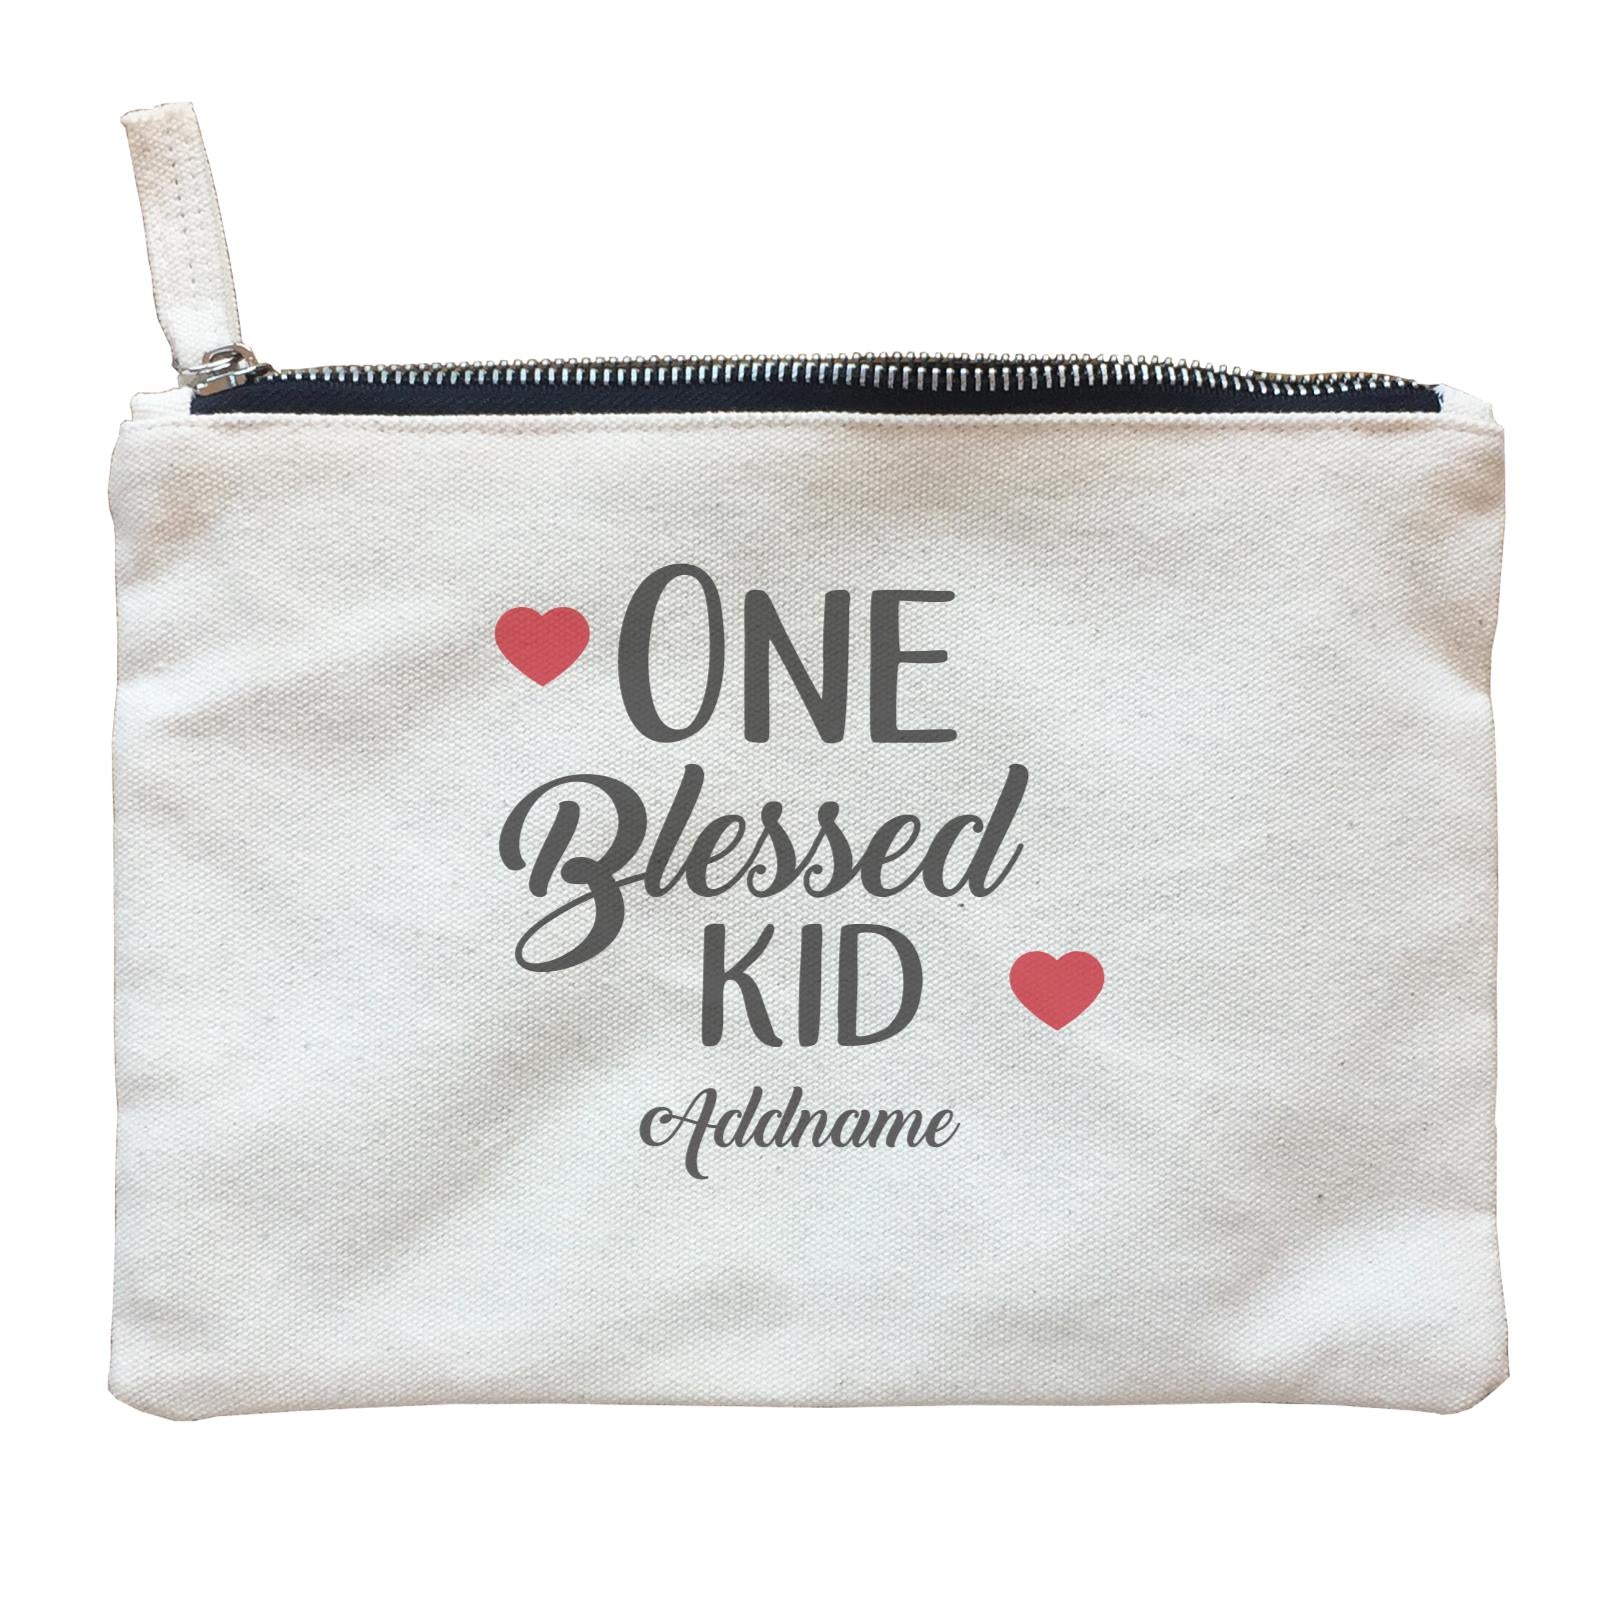 Christian Series One Blessed Kid Addname Zipper Pouch